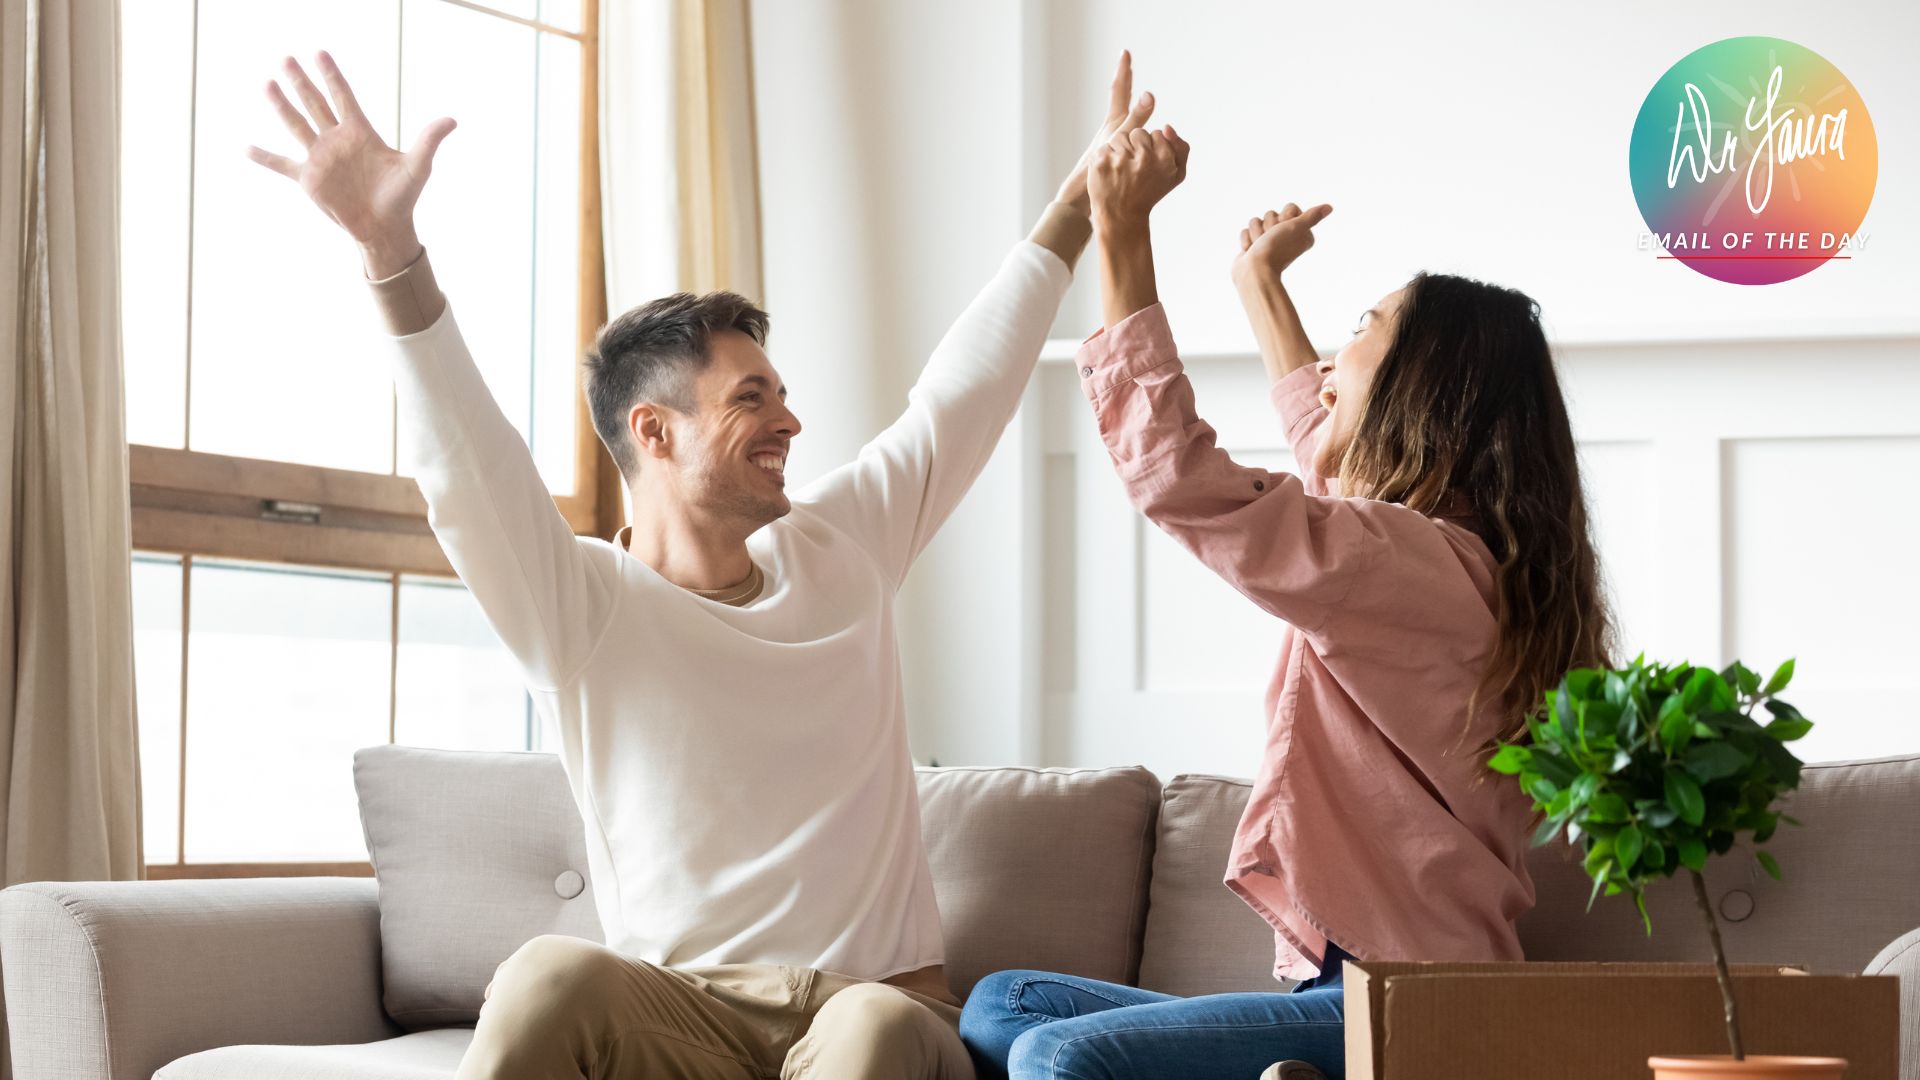 Man raises arms up while sitting next to woman with arms raised up next to him